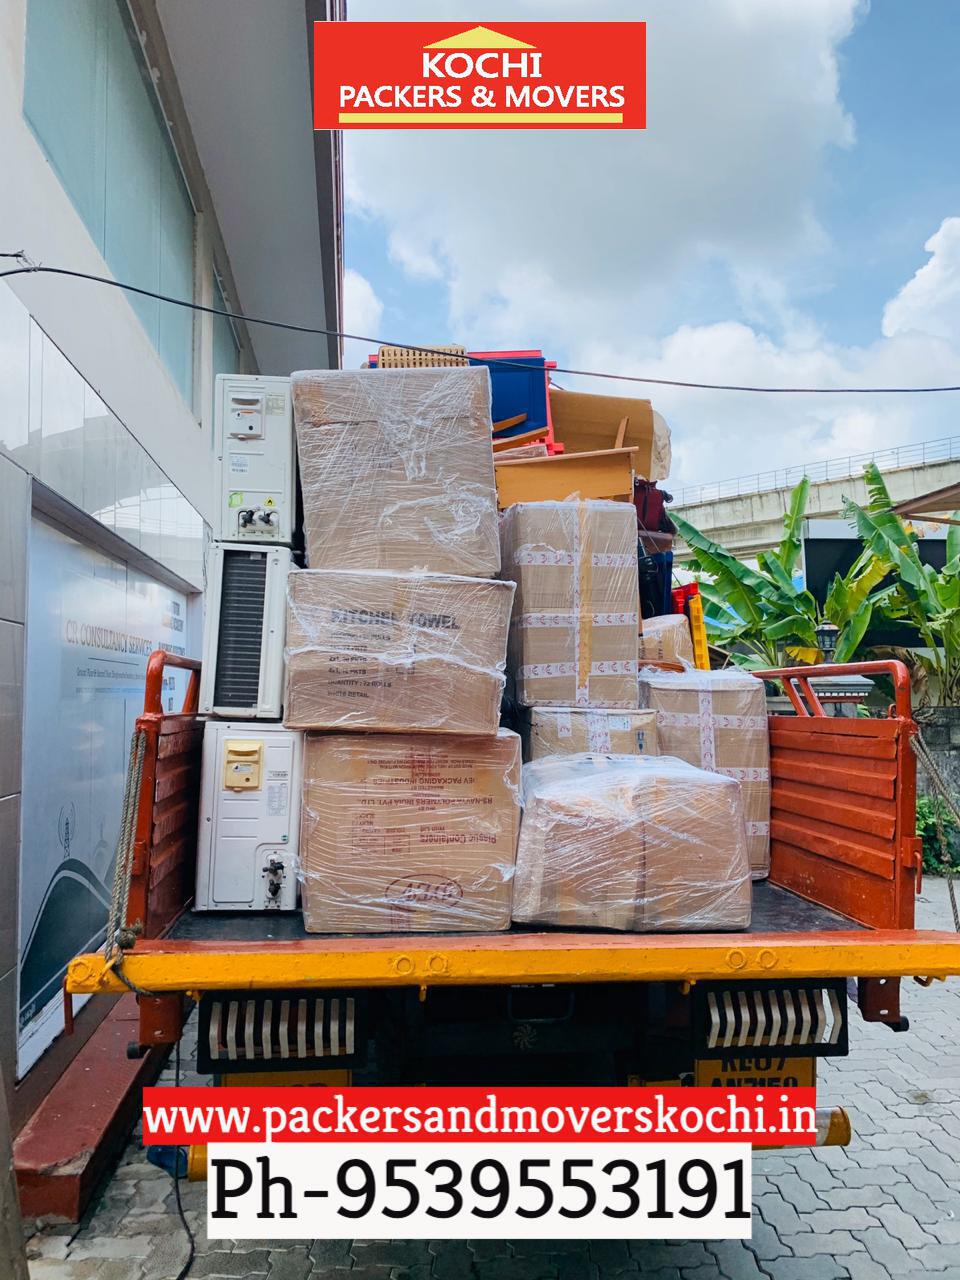 Packers and movers Kochi